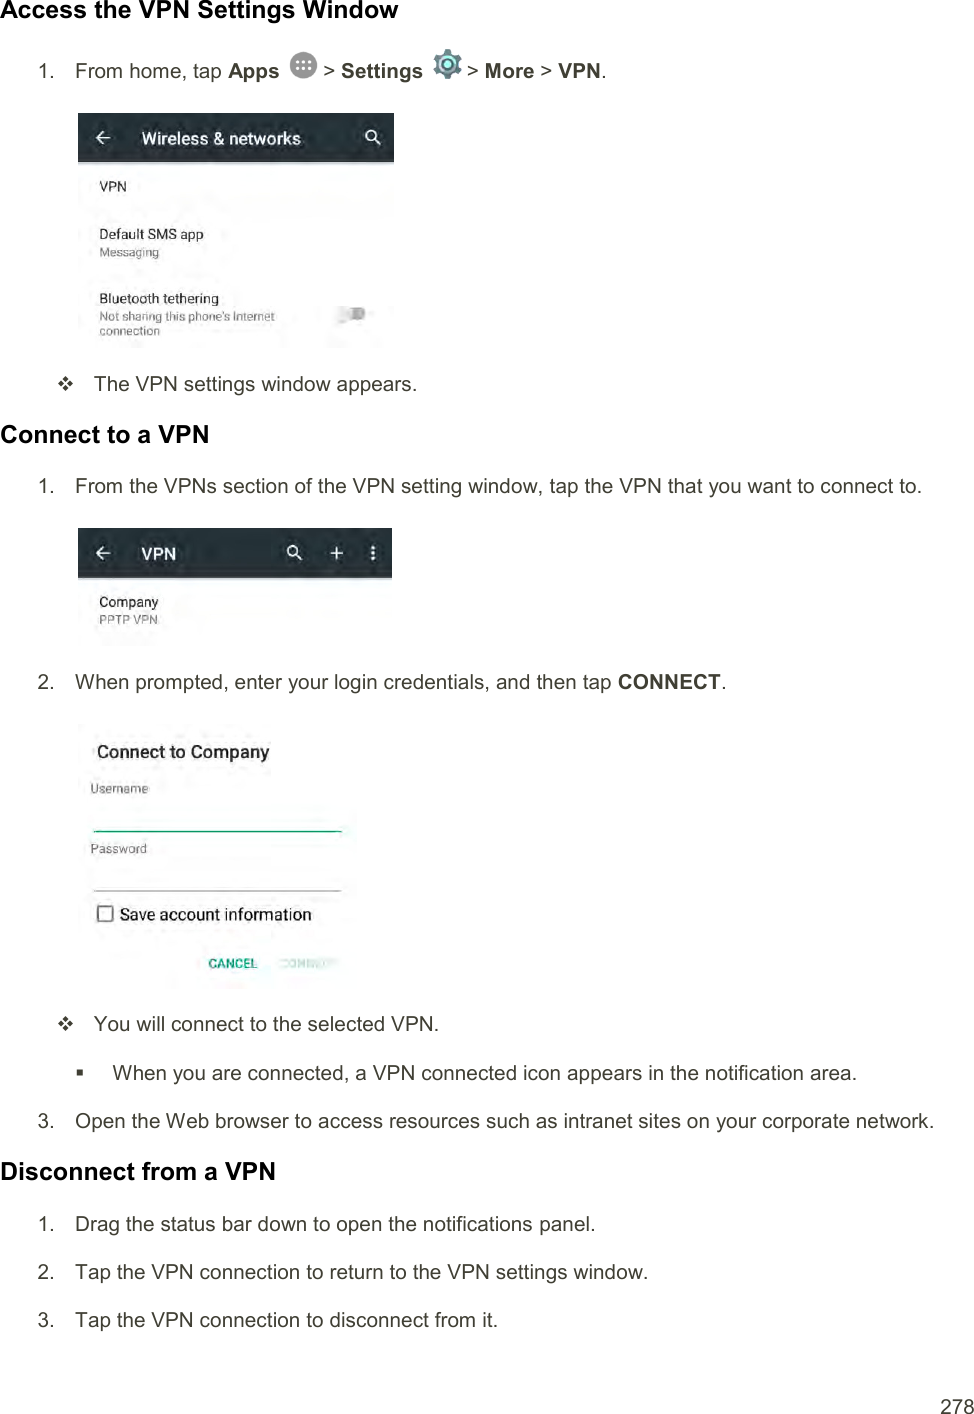  278 Access the VPN Settings Window 1.  From home, tap Apps   &gt; Settings   &gt; More &gt; VPN.     The VPN settings window appears. Connect to a VPN 1.  From the VPNs section of the VPN setting window, tap the VPN that you want to connect to.   2.  When prompted, enter your login credentials, and then tap CONNECT.      You will connect to the selected VPN.    When you are connected, a VPN connected icon appears in the notification area. 3.  Open the Web browser to access resources such as intranet sites on your corporate network. Disconnect from a VPN 1.  Drag the status bar down to open the notifications panel. 2.  Tap the VPN connection to return to the VPN settings window. 3.  Tap the VPN connection to disconnect from it.  